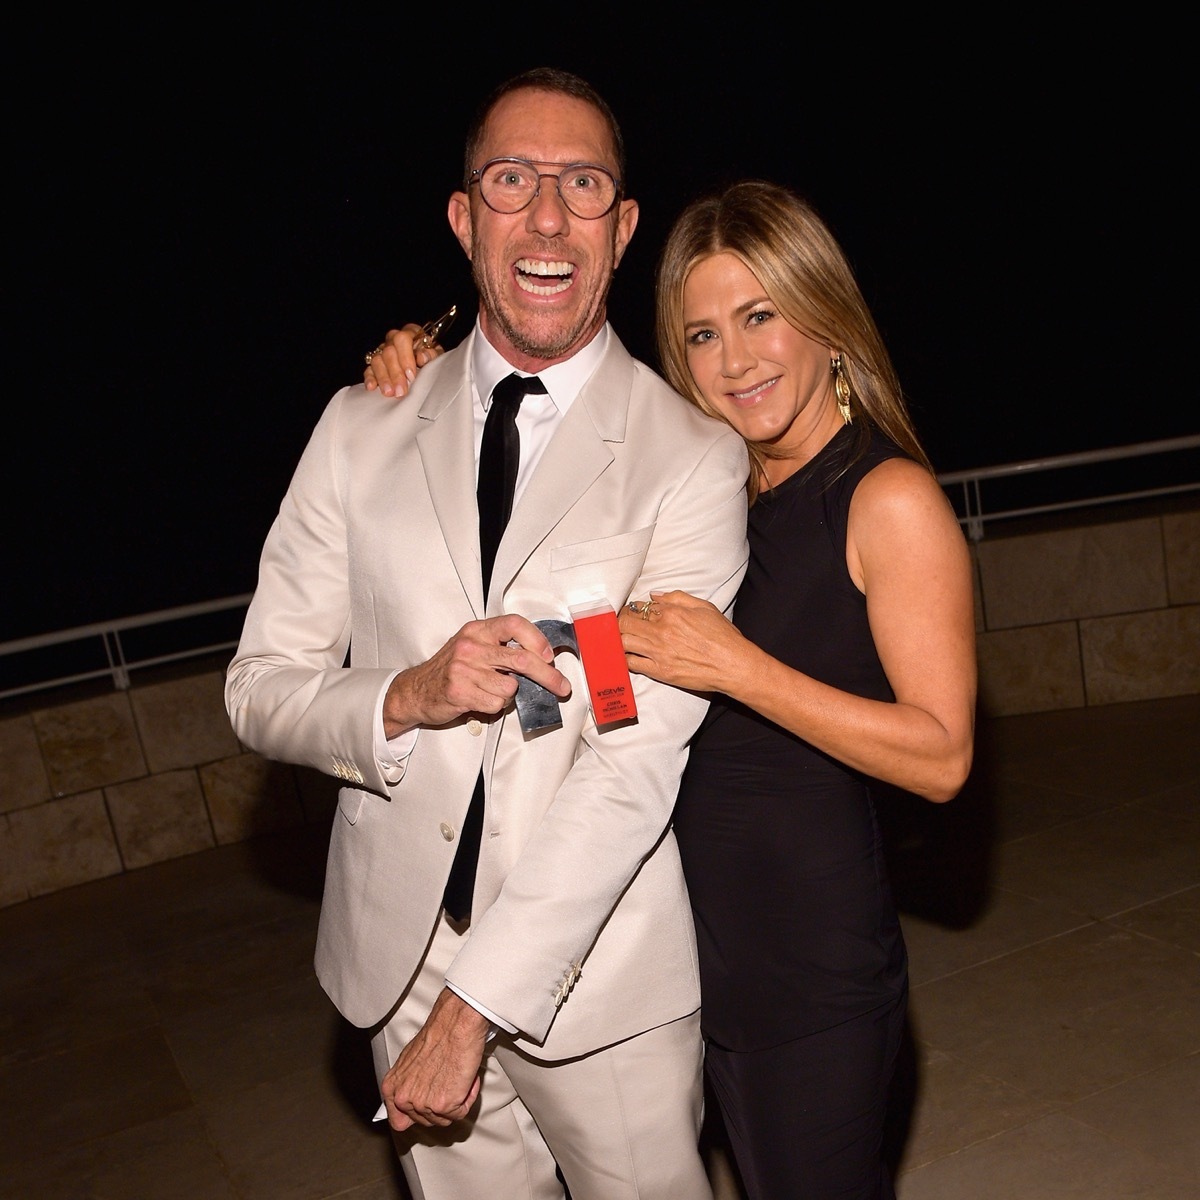 Chris McMillan and Jennifer Aniston at the InStyle Awards in 2018